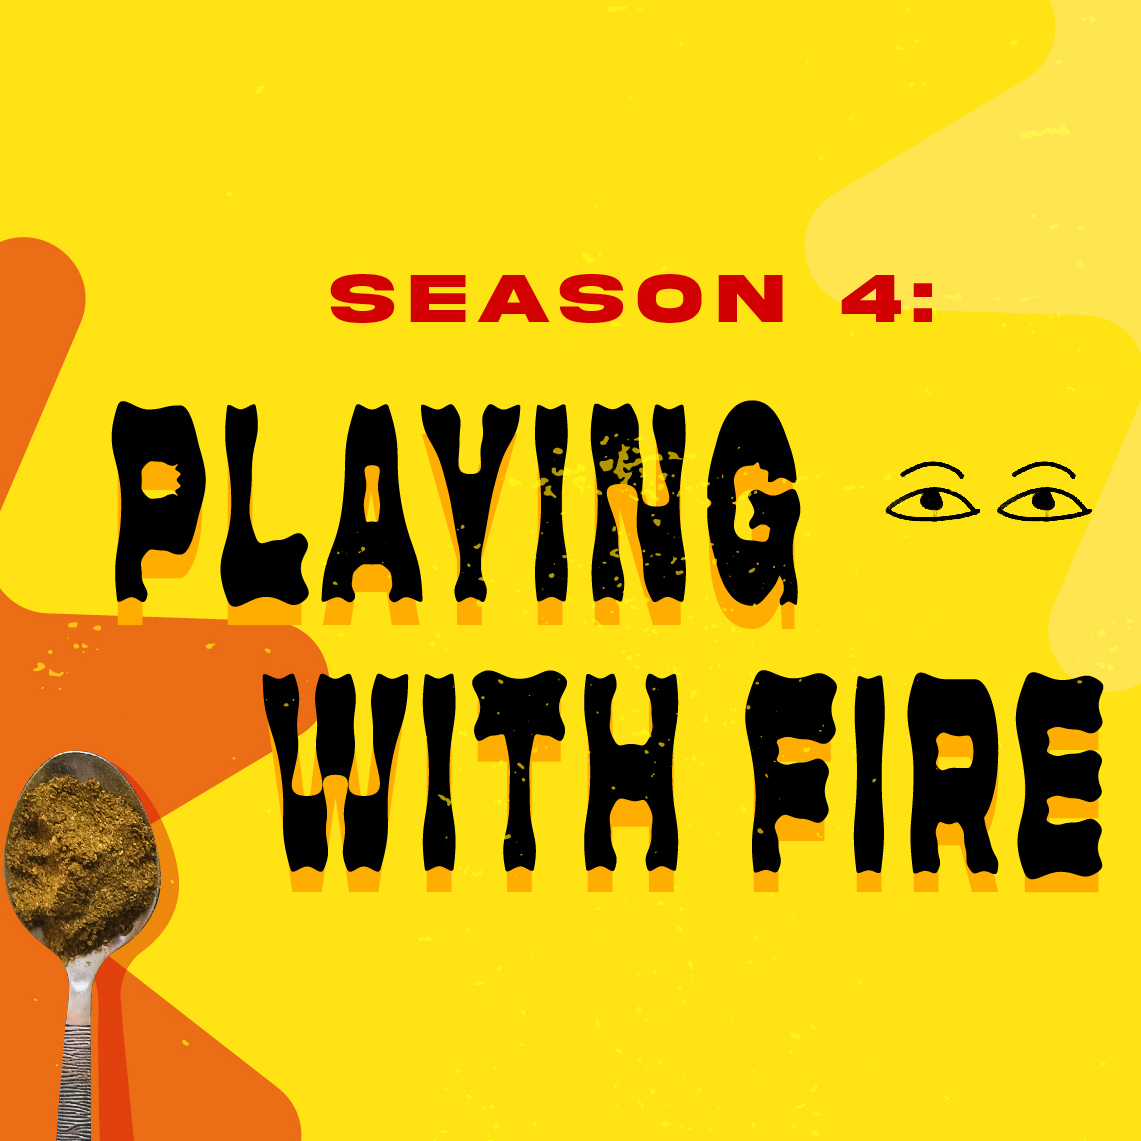 Season 4: Playing With Fire